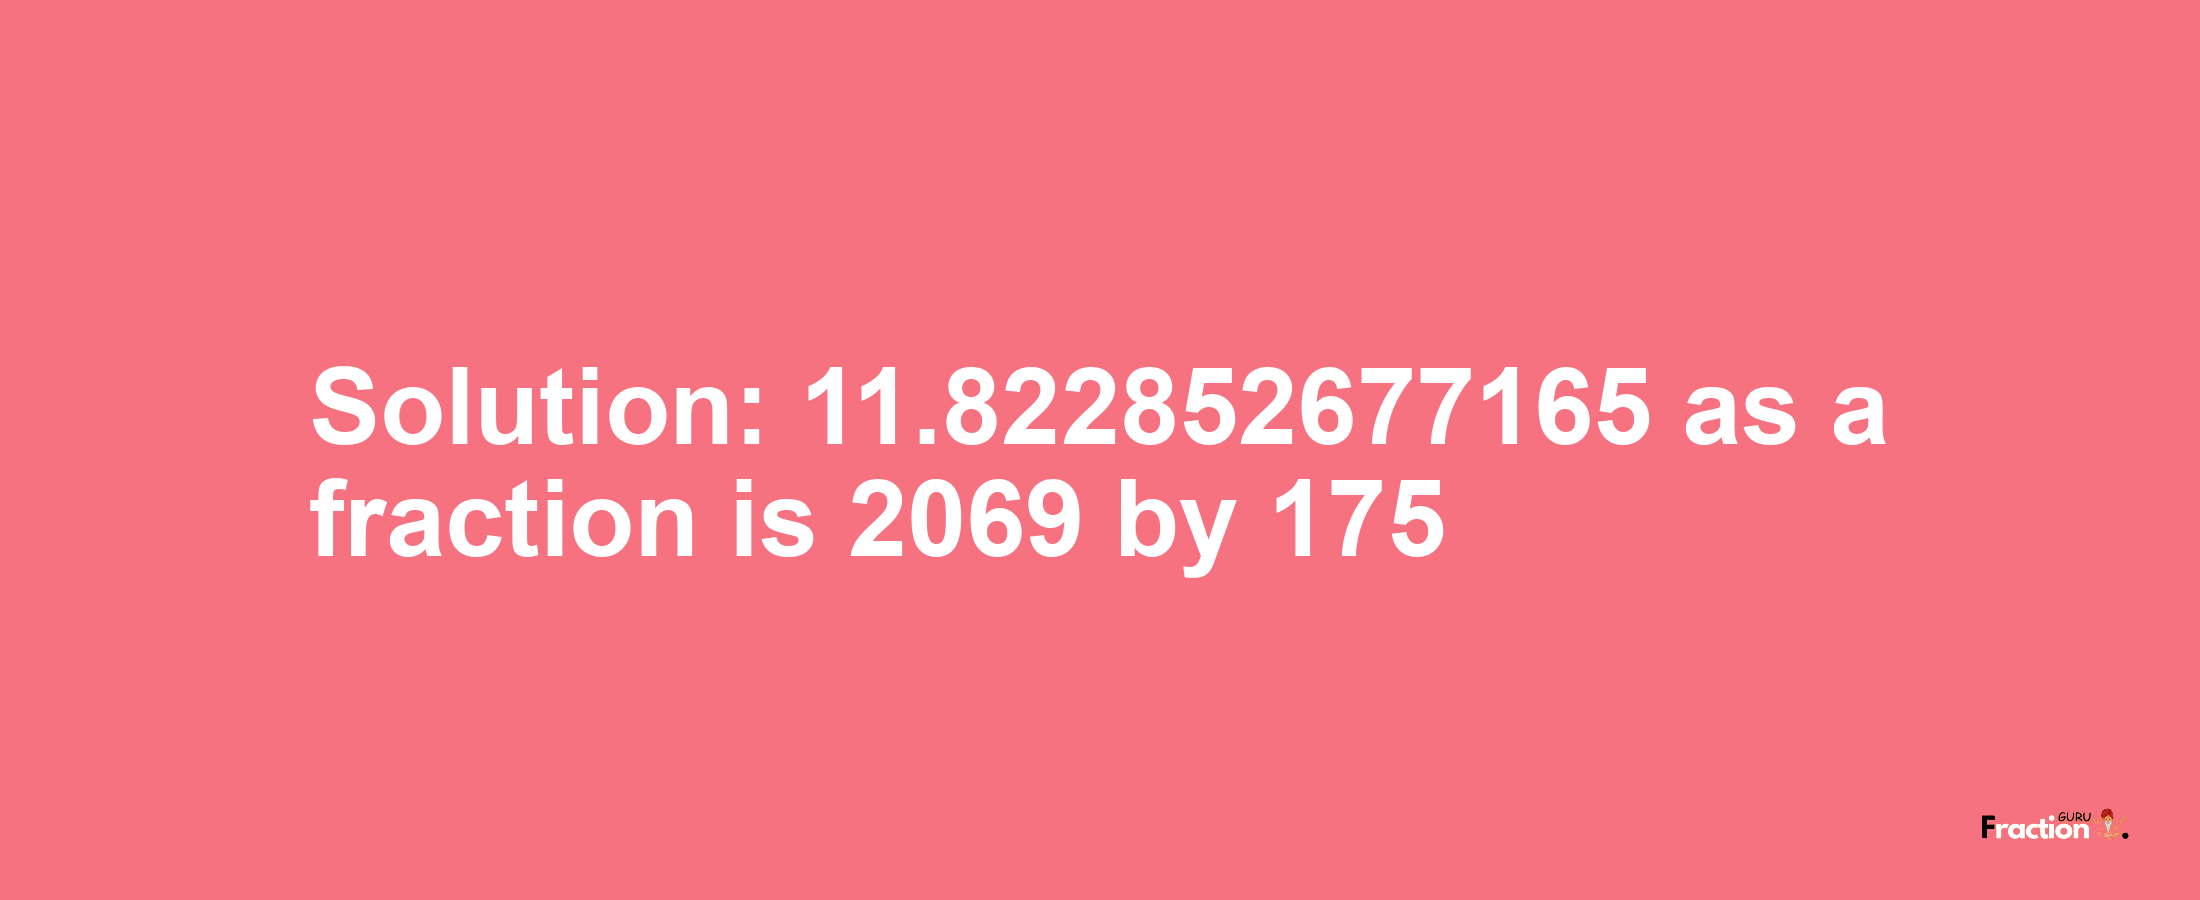 Solution:11.822852677165 as a fraction is 2069/175